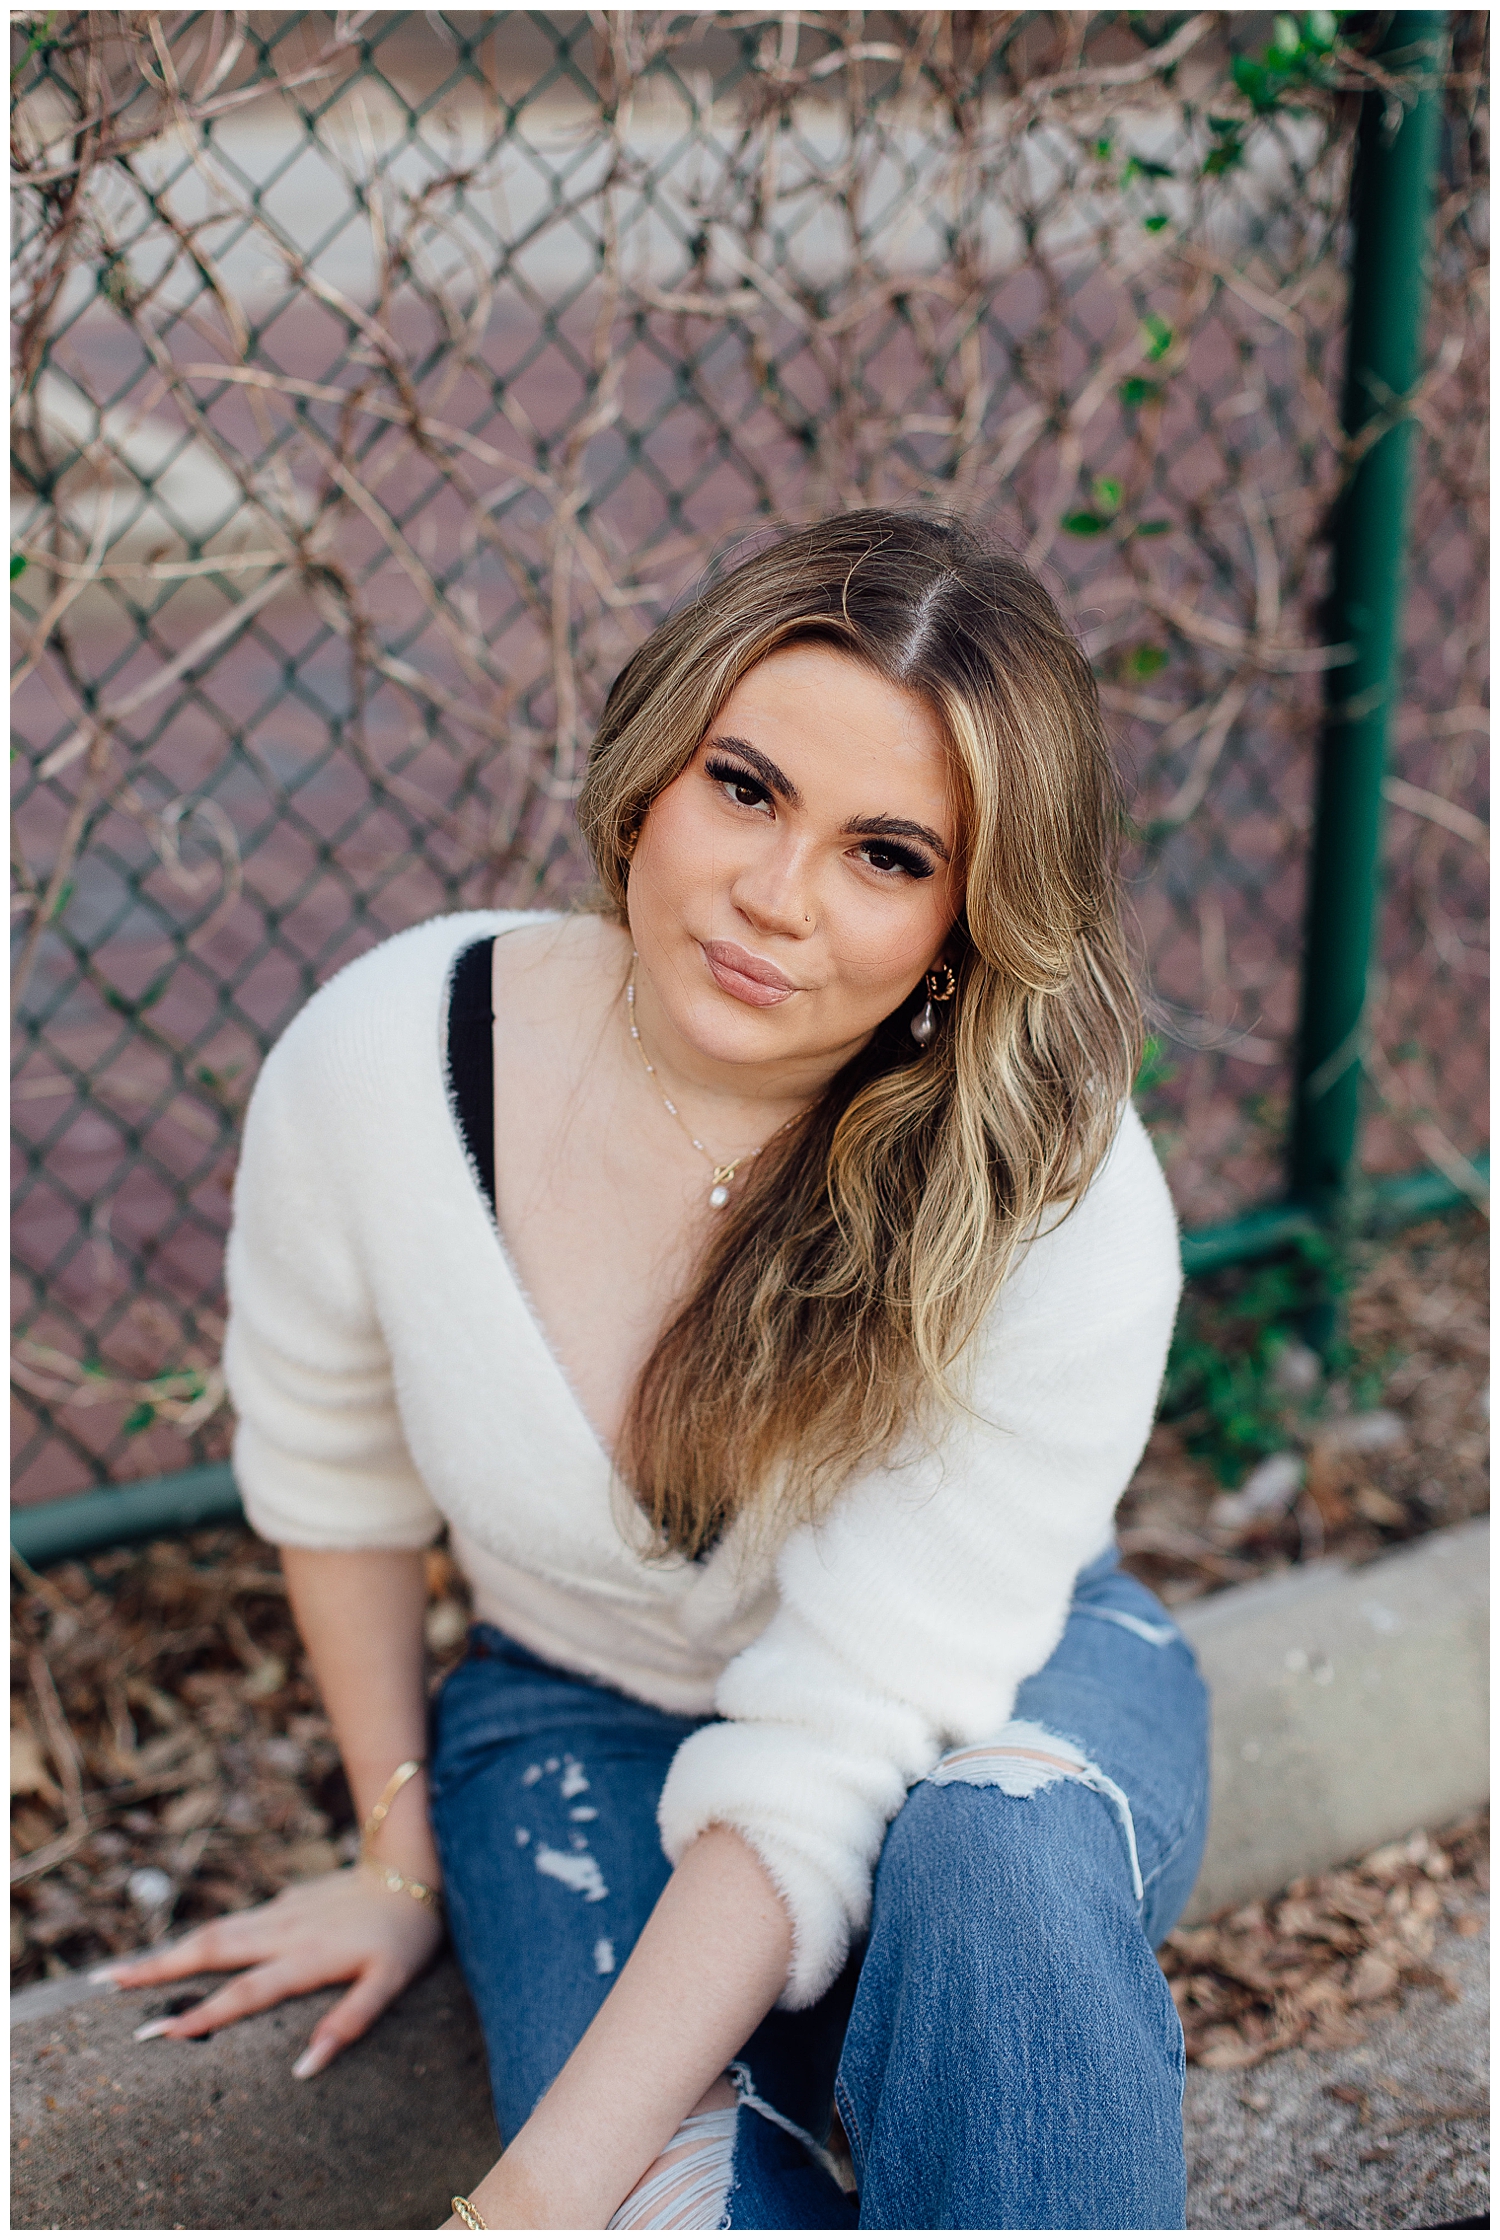 high school senior girl in cream top and jeans sitting against a fence Houston downtown senior photos